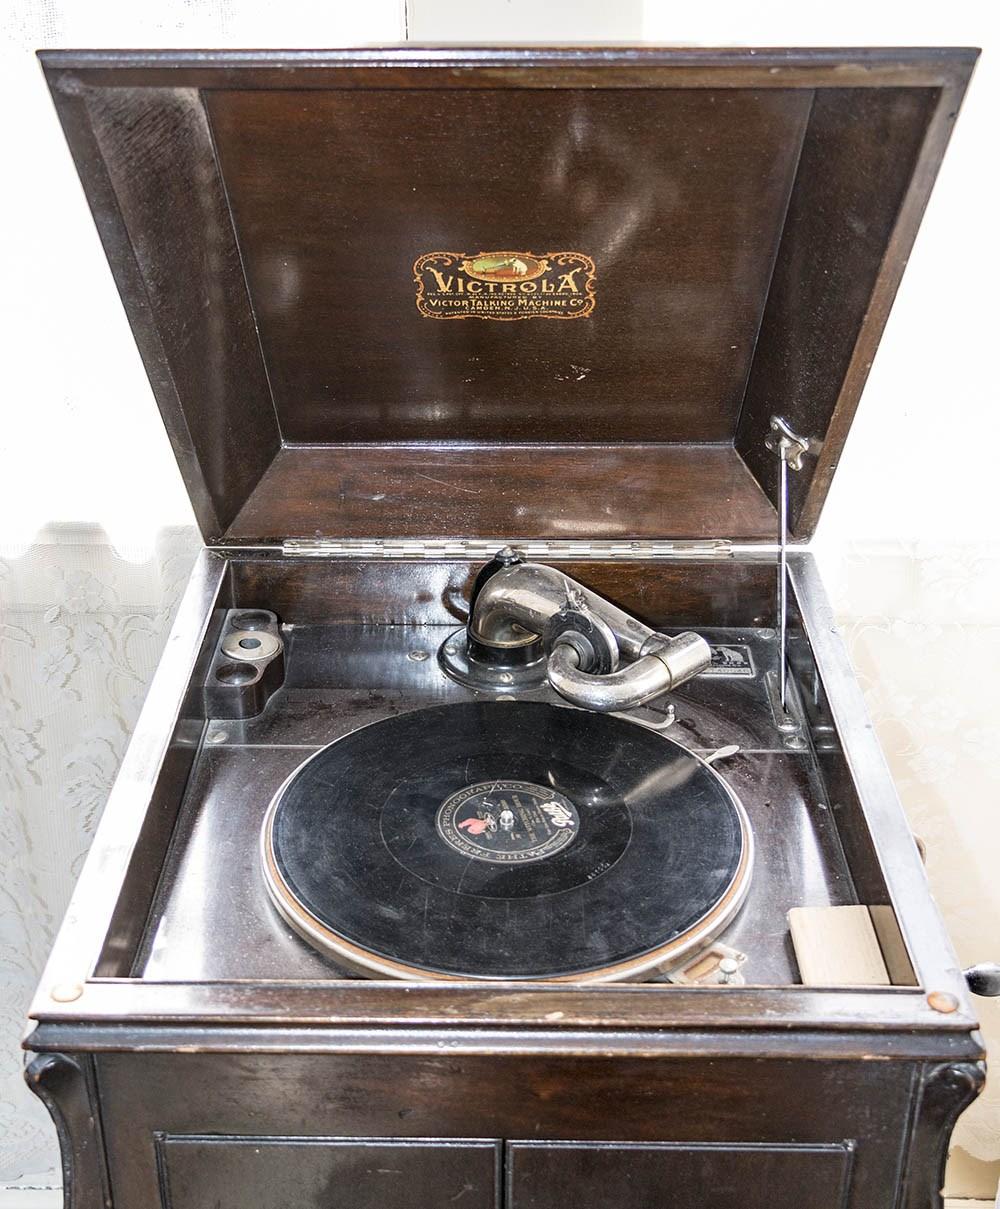 The power lasts just as long as the record and not much more, so when you wanted to listen to another record you would crank the handle again.